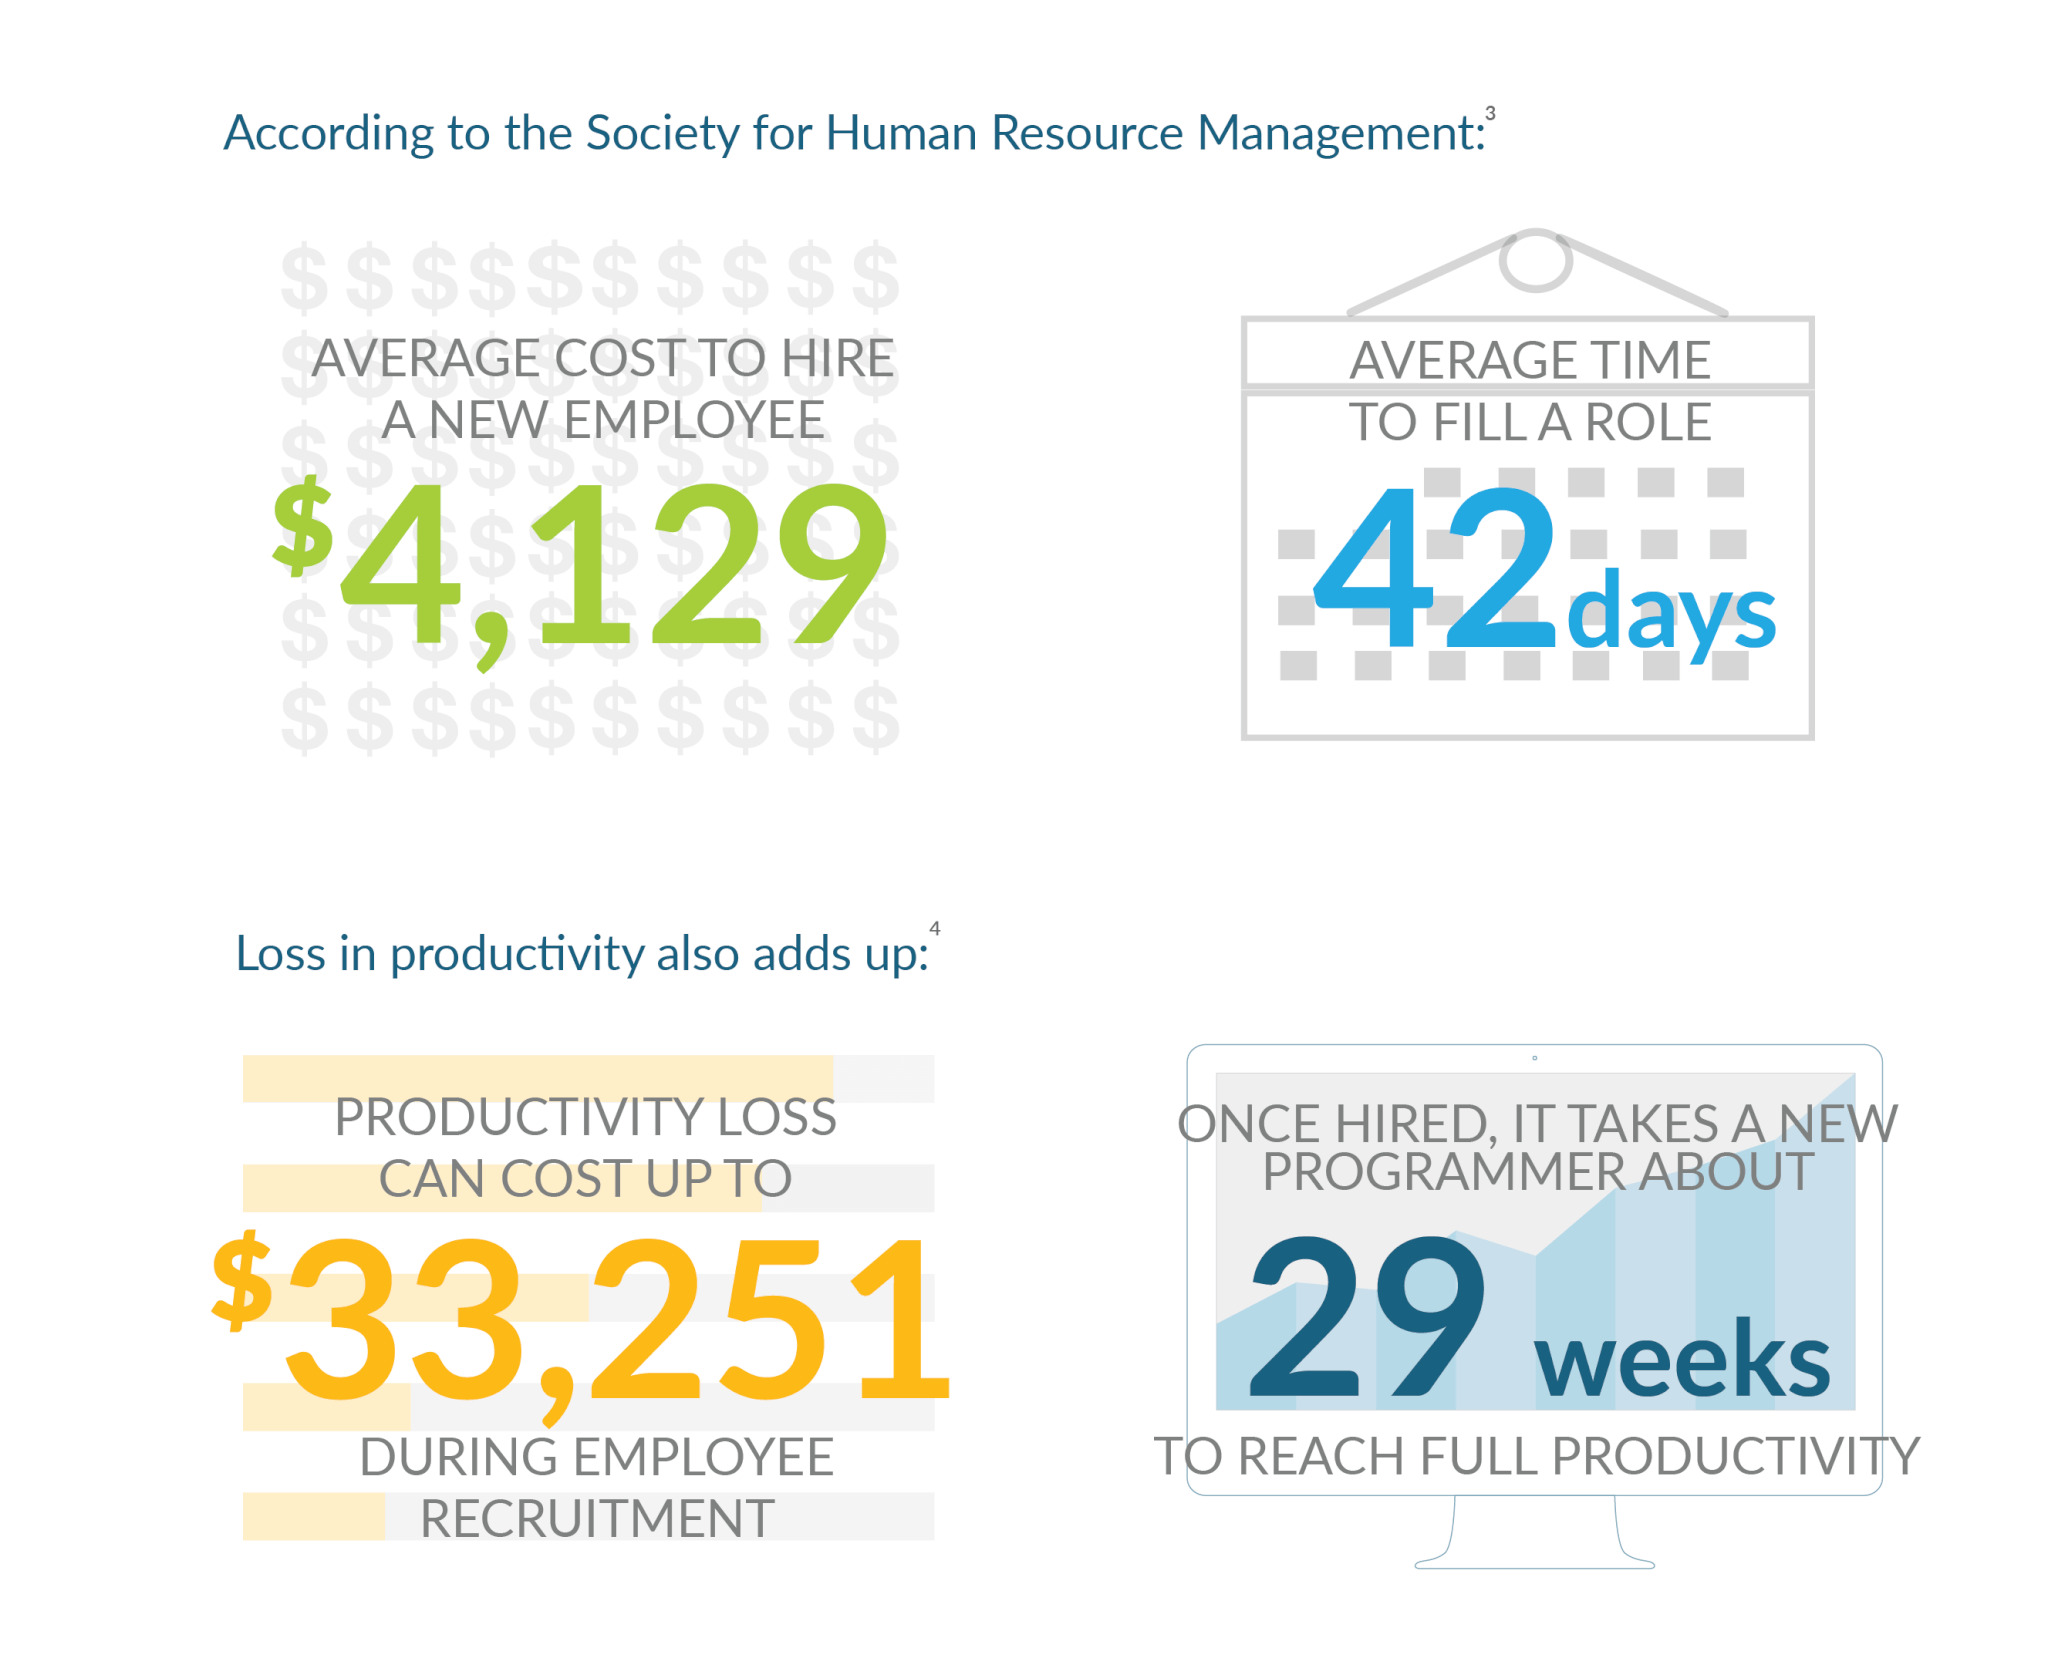 A key outsourcing benefit is quickly adding new team members. This image shows that the average cost to hire a new employee is $4,129, the average time to fill a role is 42 days, productivity loss during recruitment is $32,251, and once hired it takes a now programmer about 29 weeks to reach full productivity.